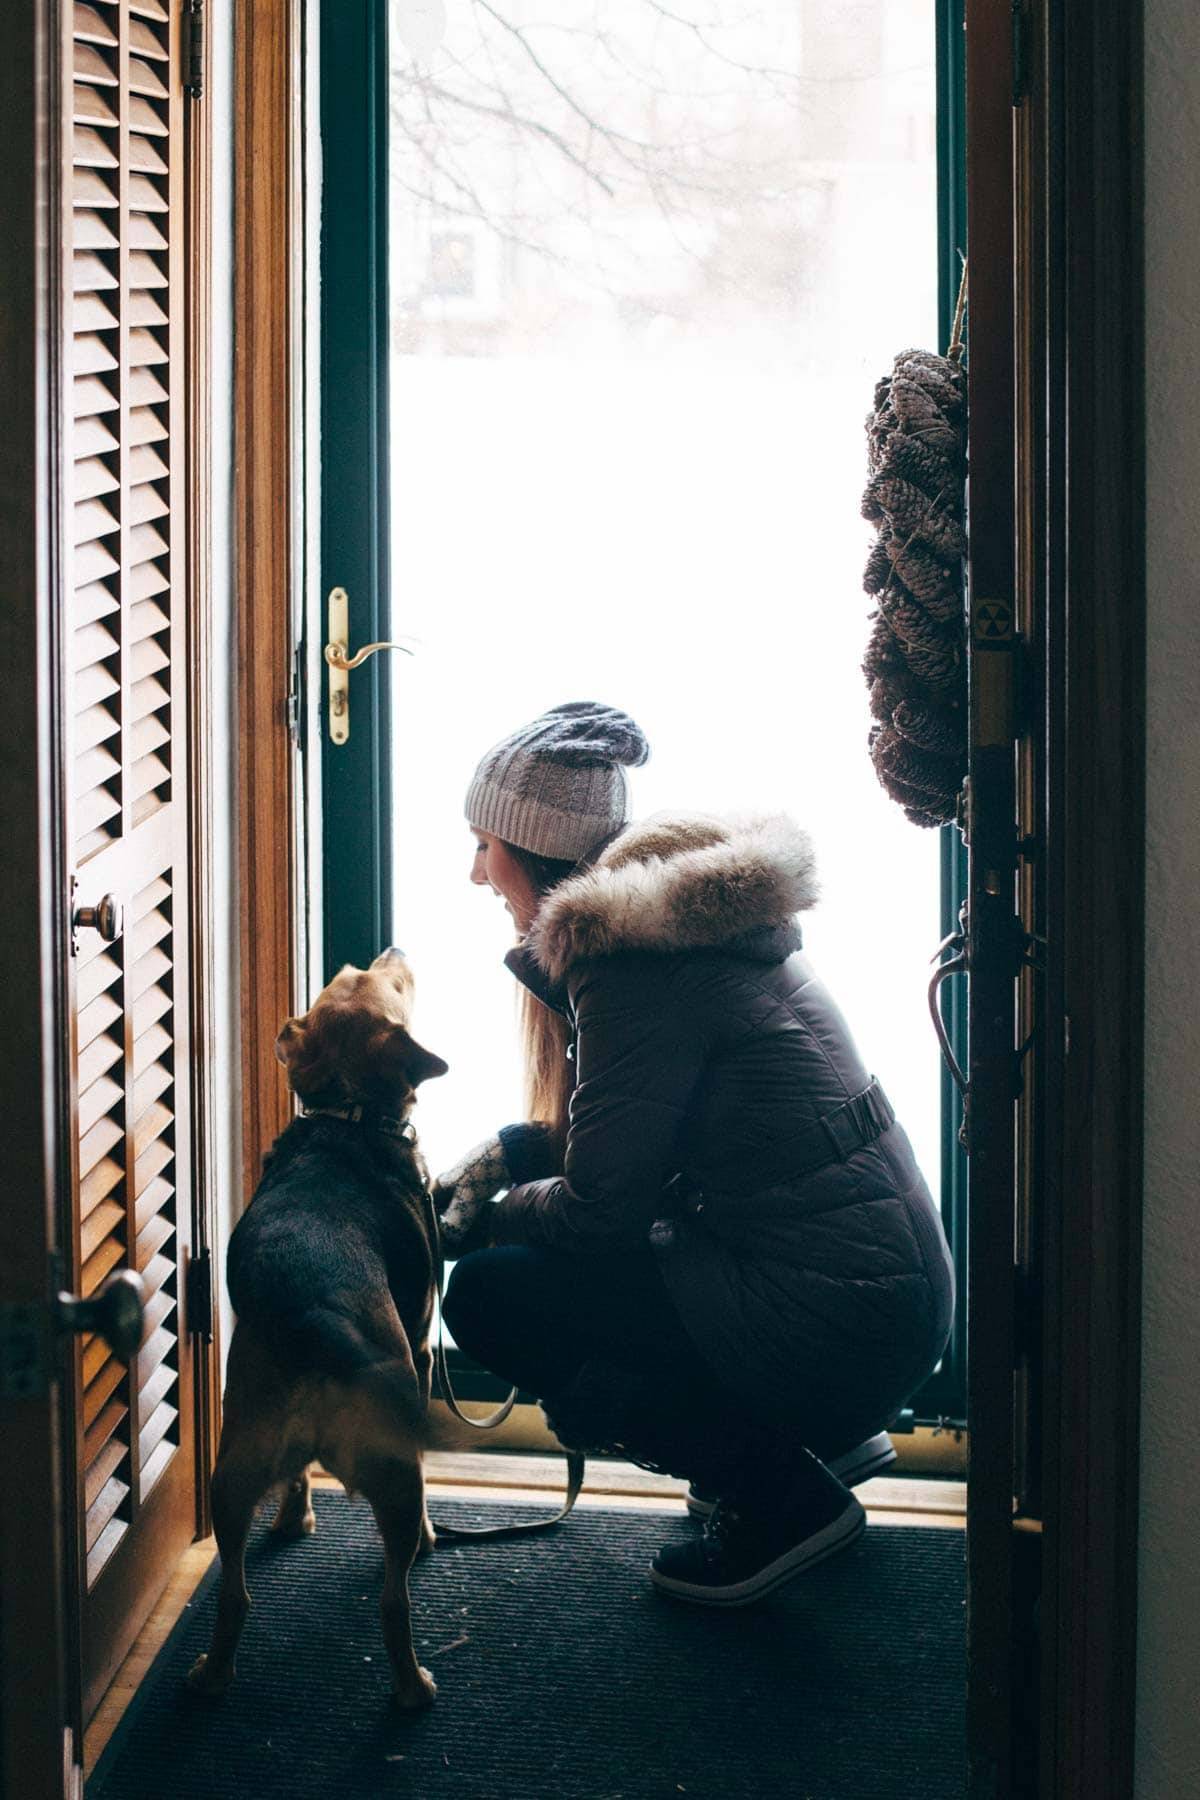 Woman dressed warmly kneeling next to a dog near a door looking out on a winter scene.